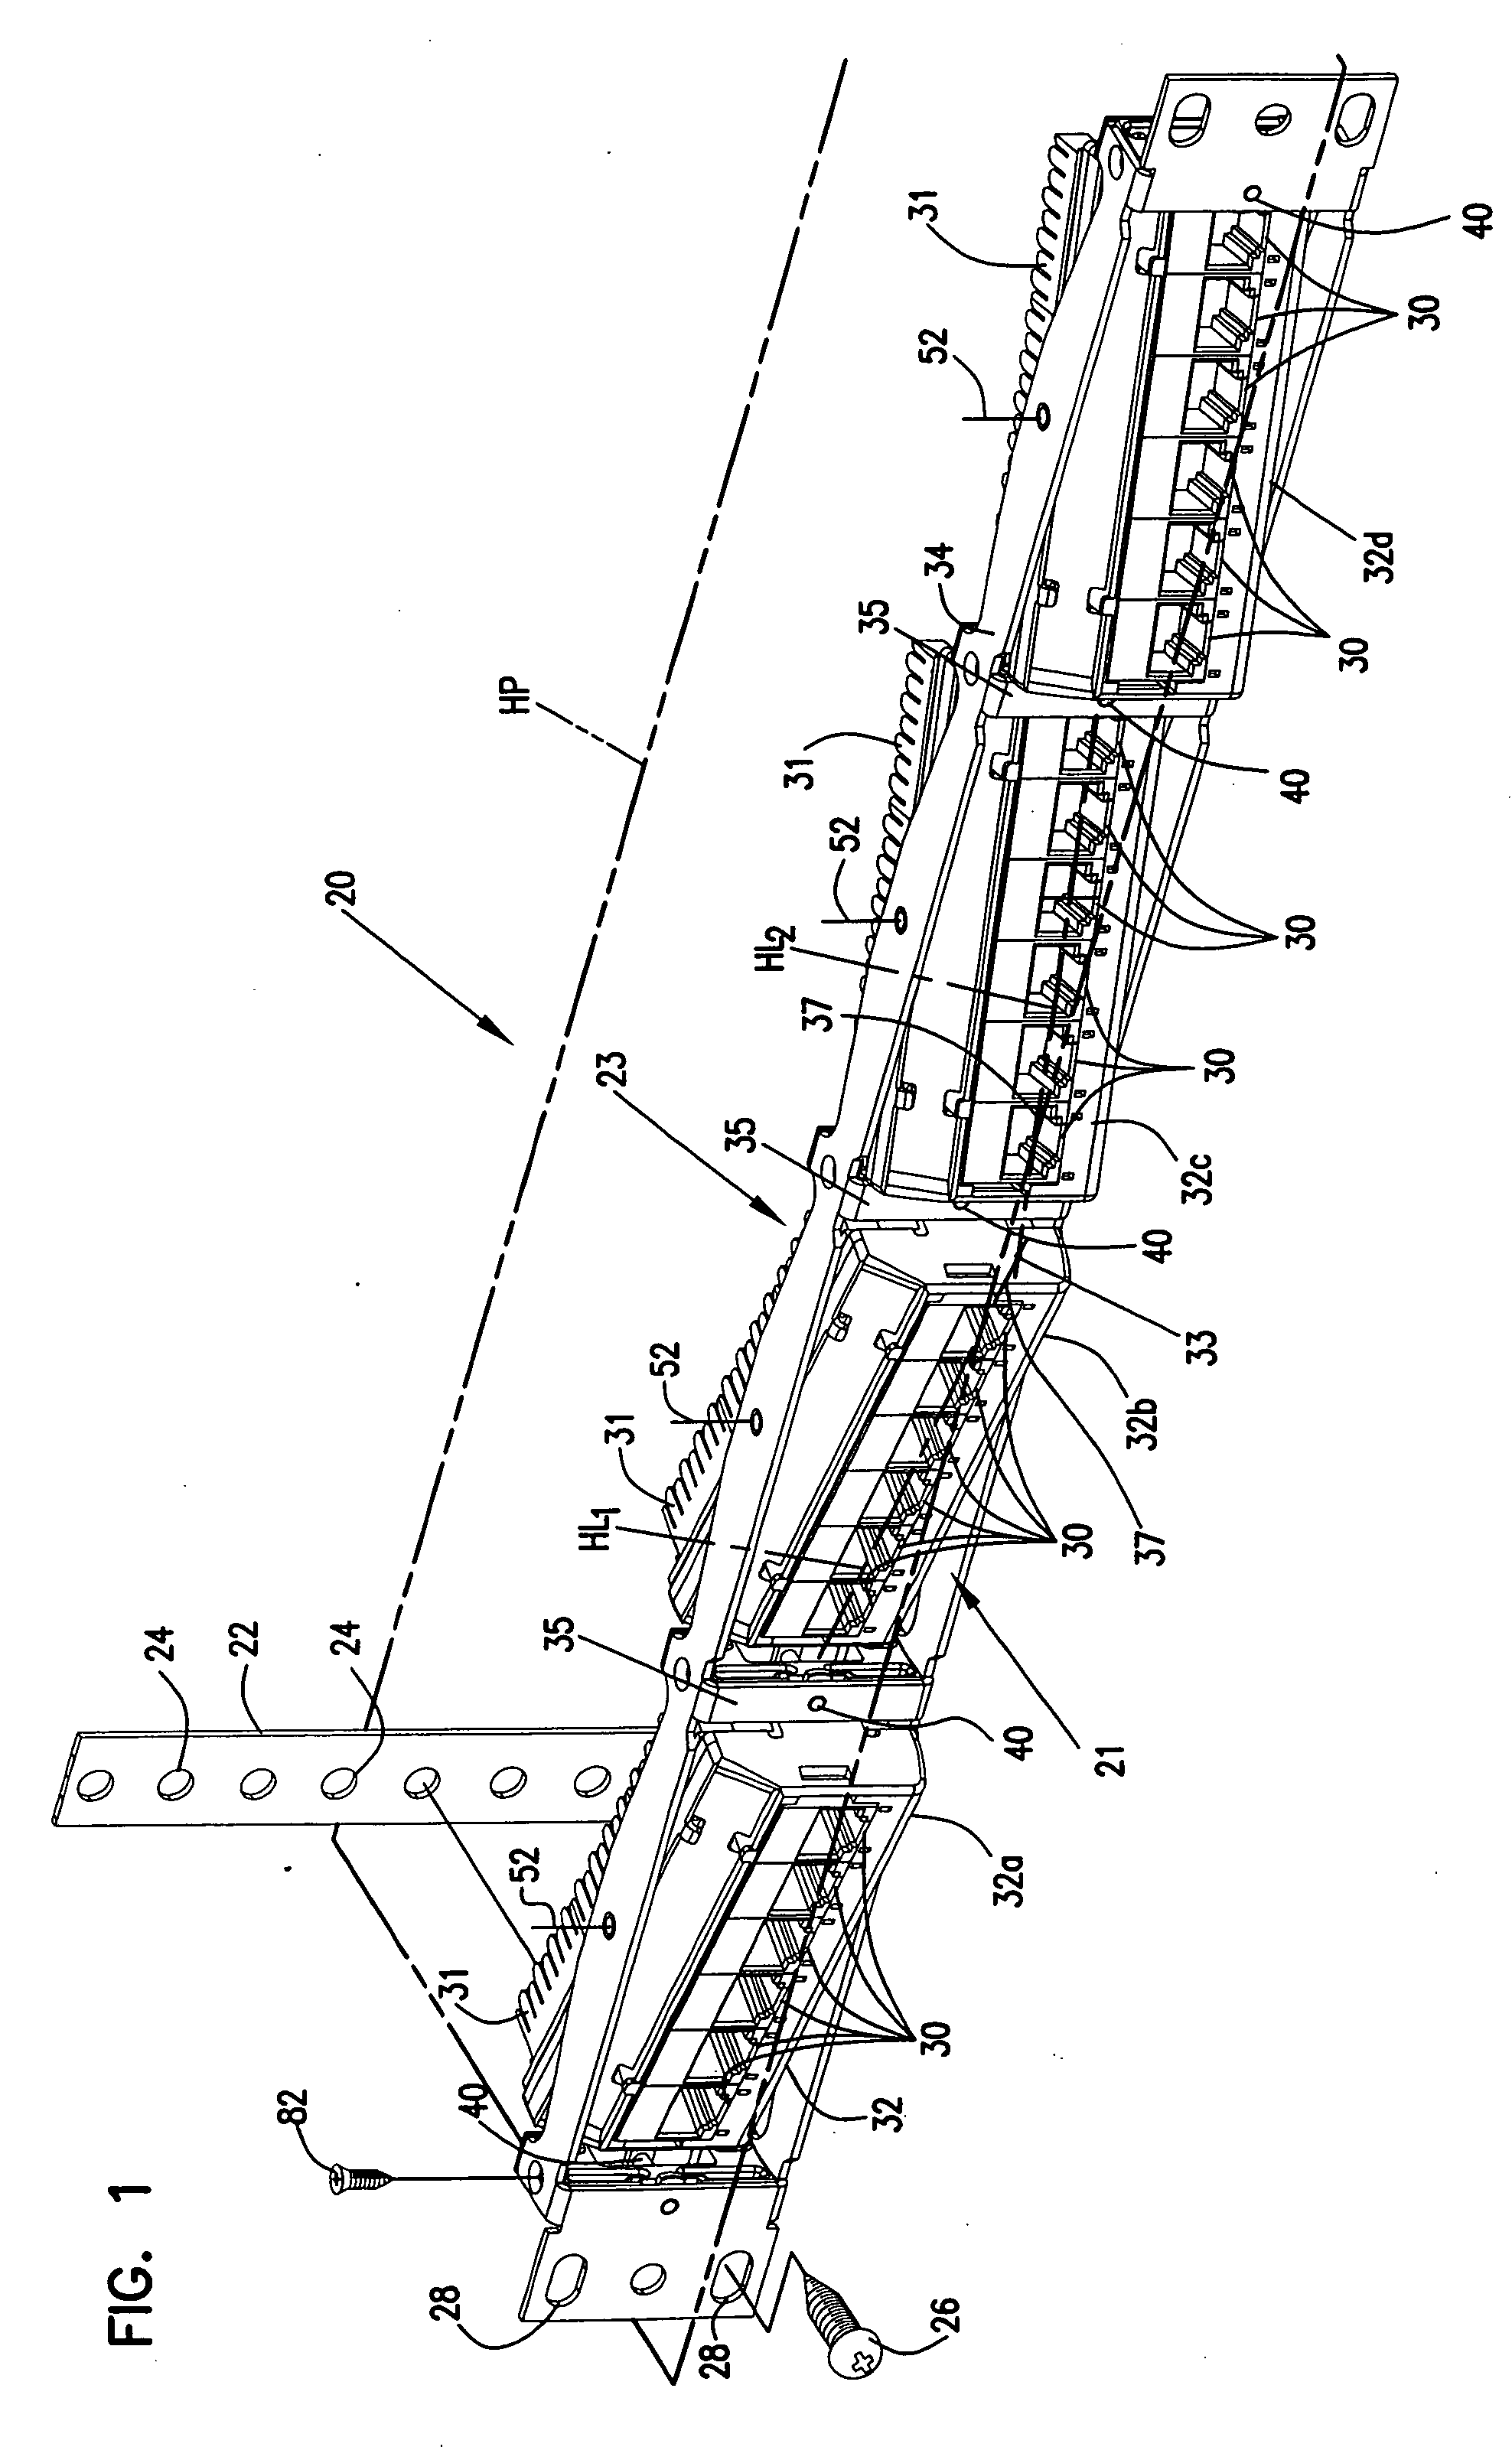 Telecommunications patch panel with angled connector modules